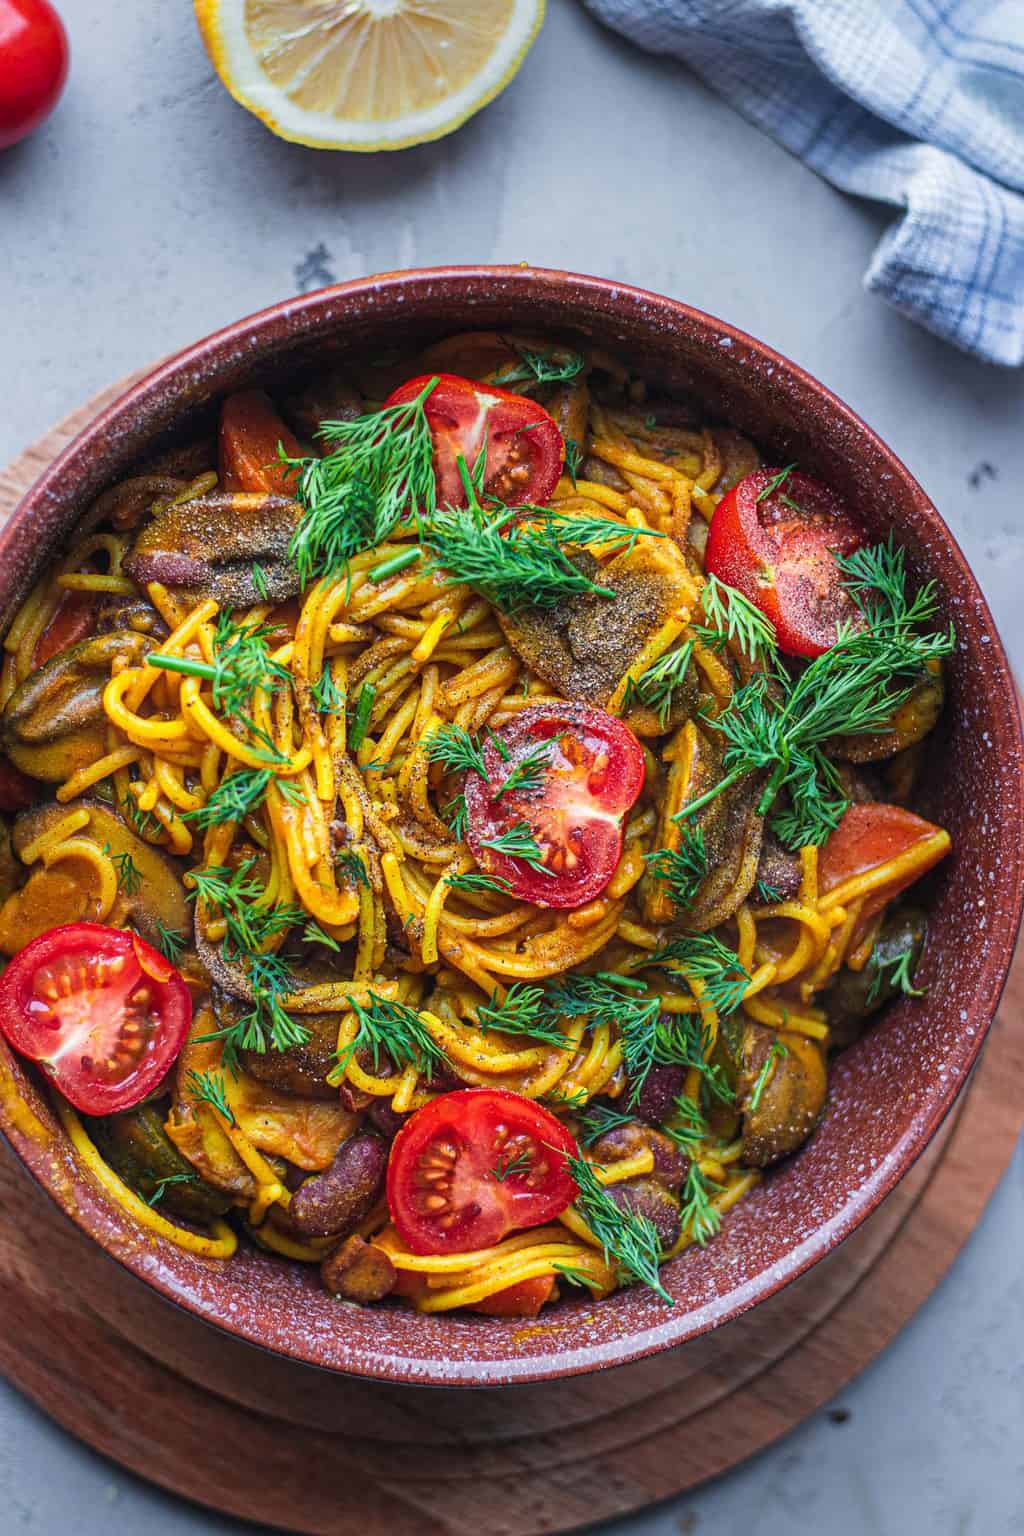 Spaghetti with beans and vegetables in a brown bowl